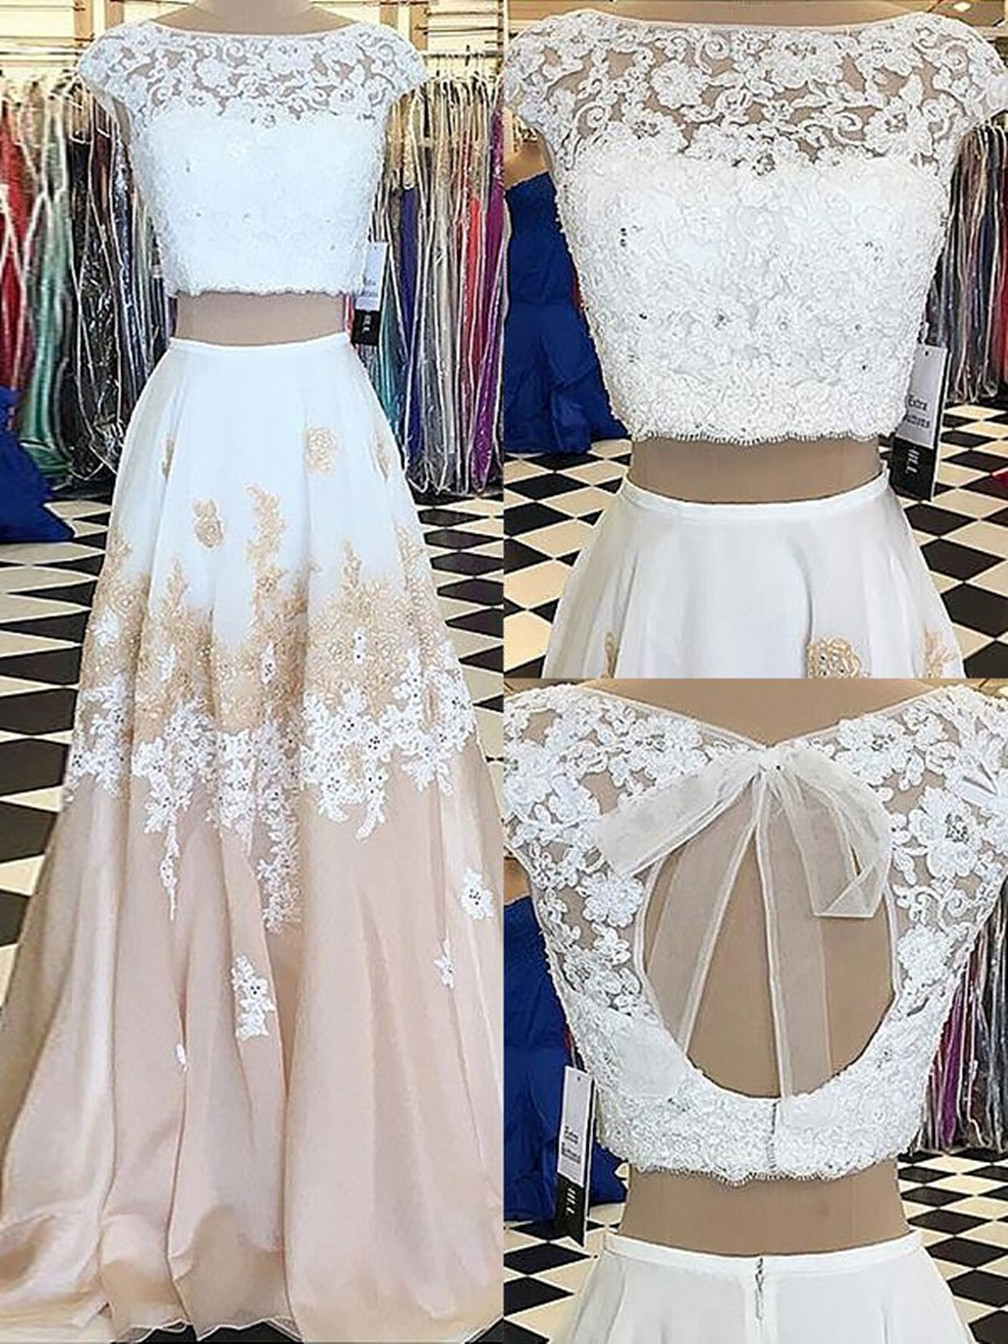 Women A-line/princess Lace Prom Dresses Long Sleeveless Appliques Evening Party Gowns Sleeveless Formal Dress Yp080